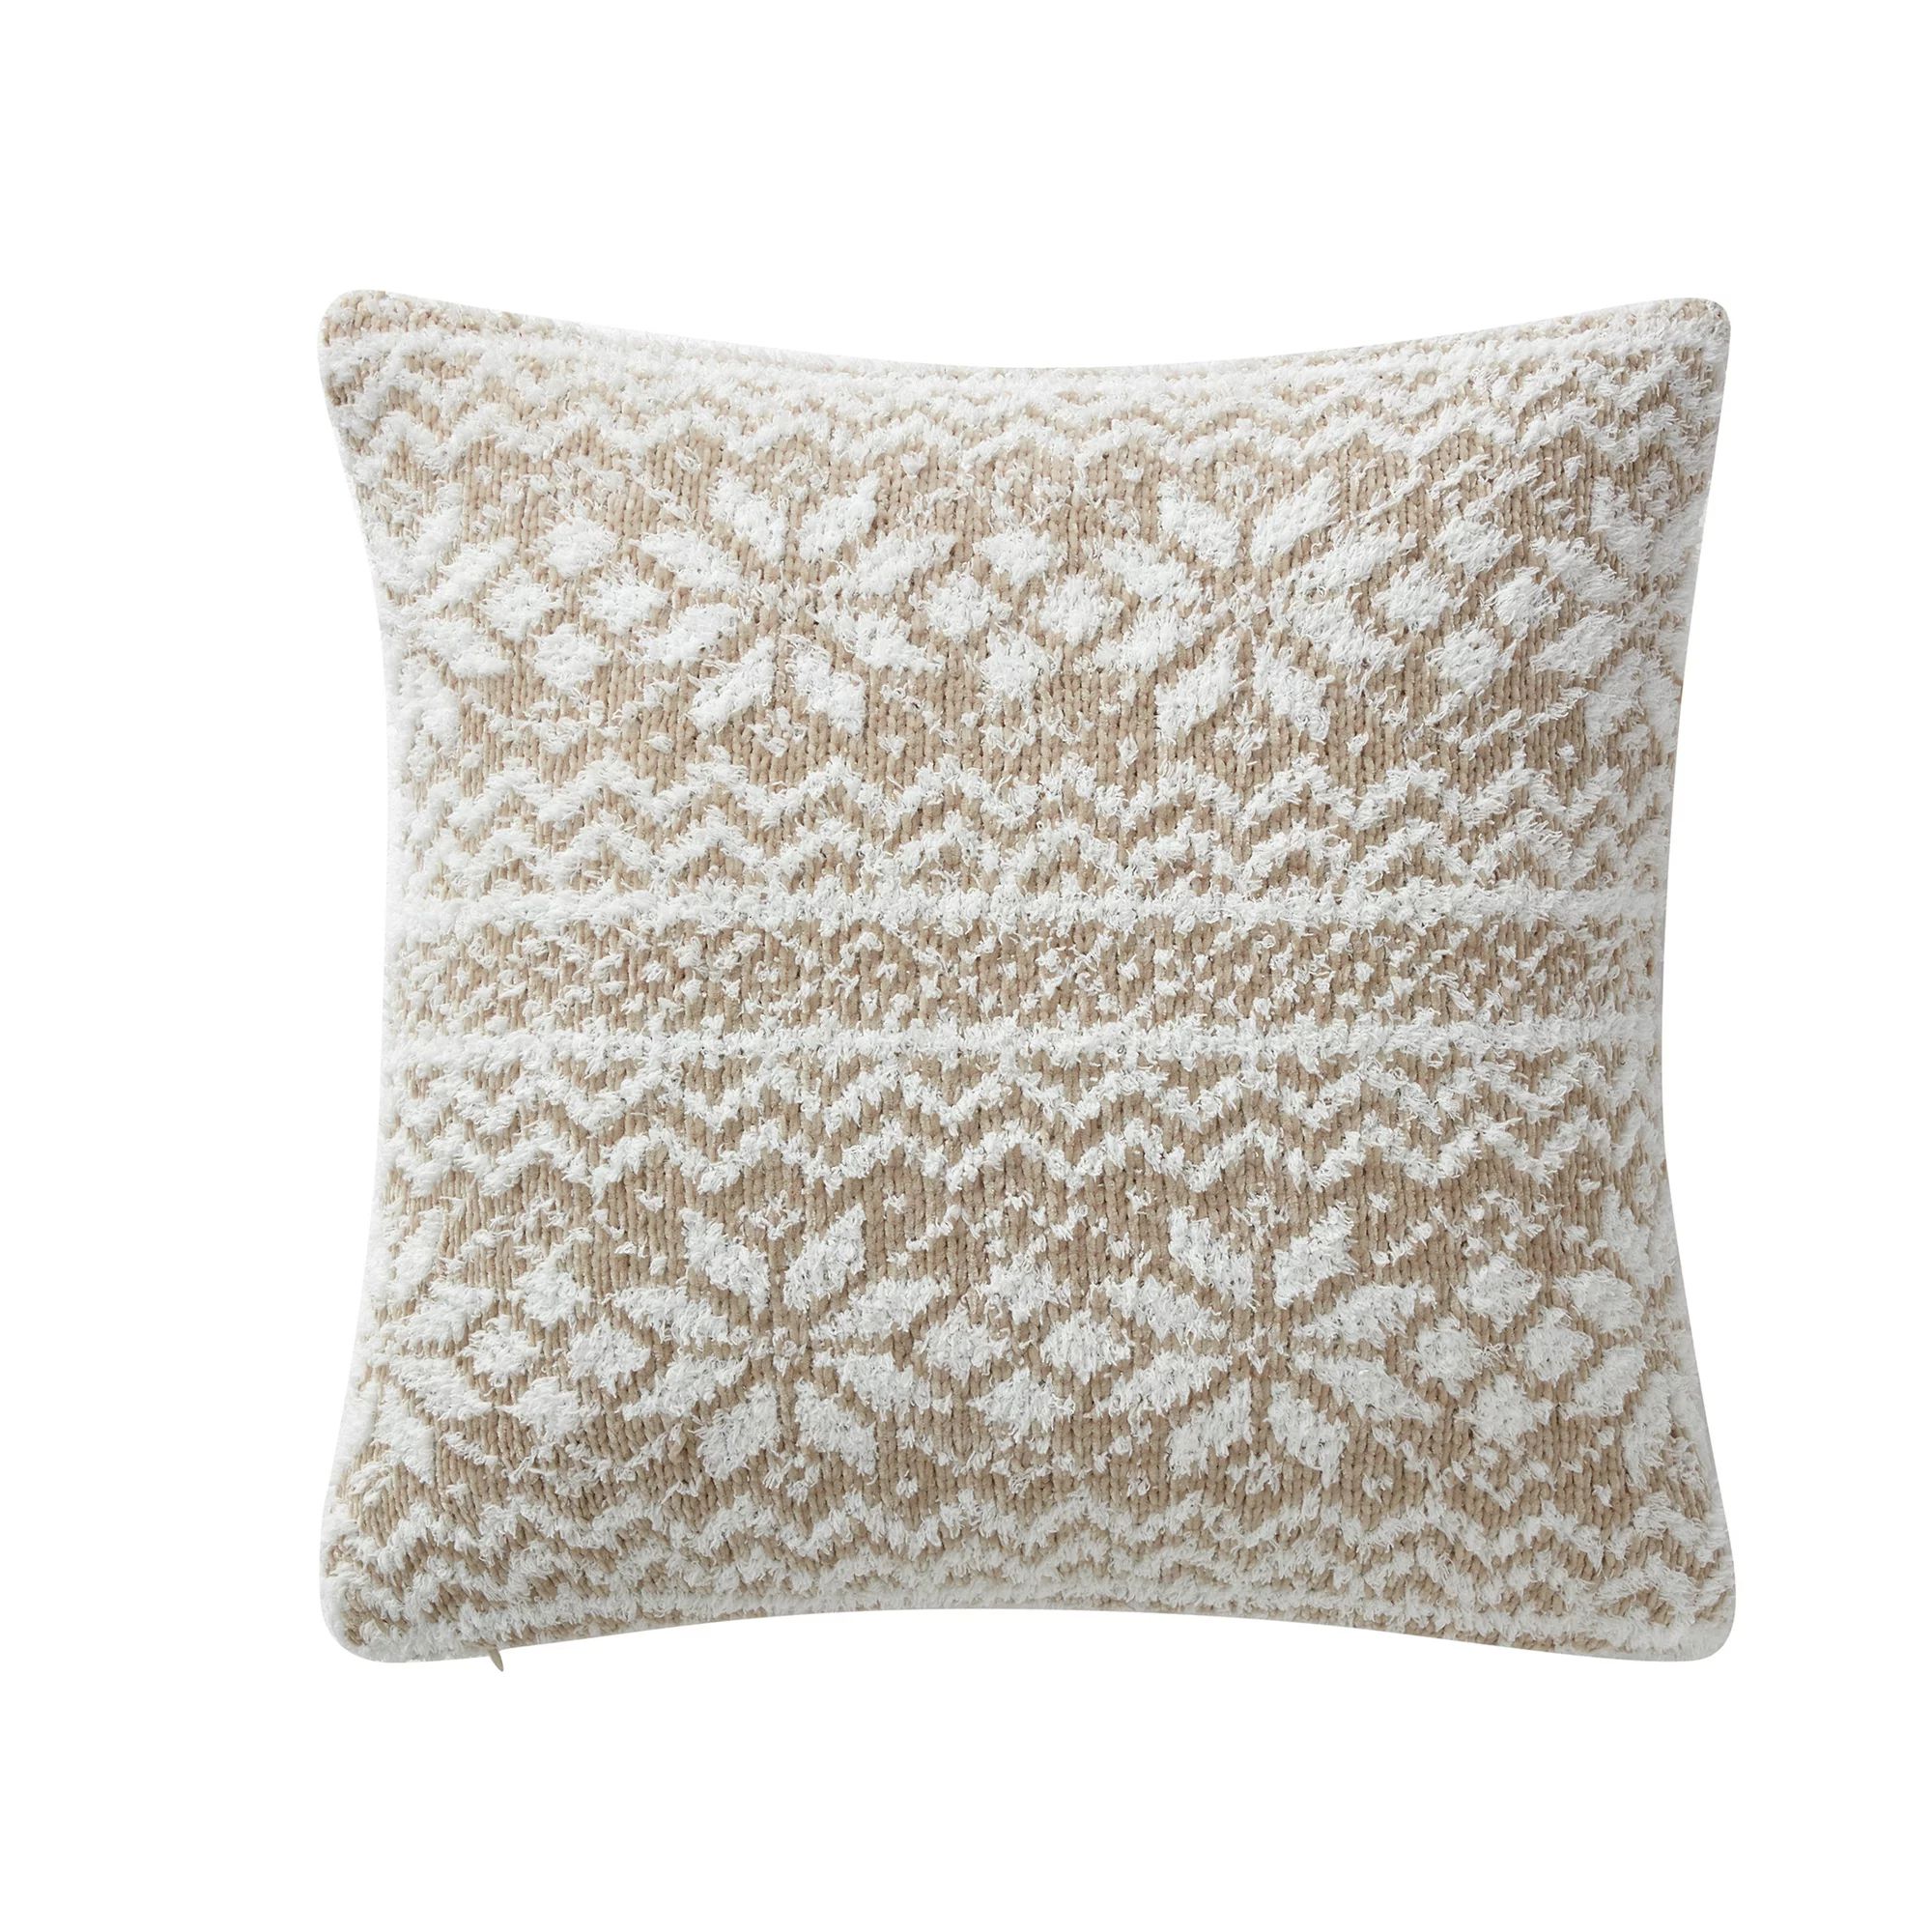 My Texas House Aspen Chenille Snowflake Square Decorative Pillow Cover, 20" x 20", Taupe | Walmart (US)